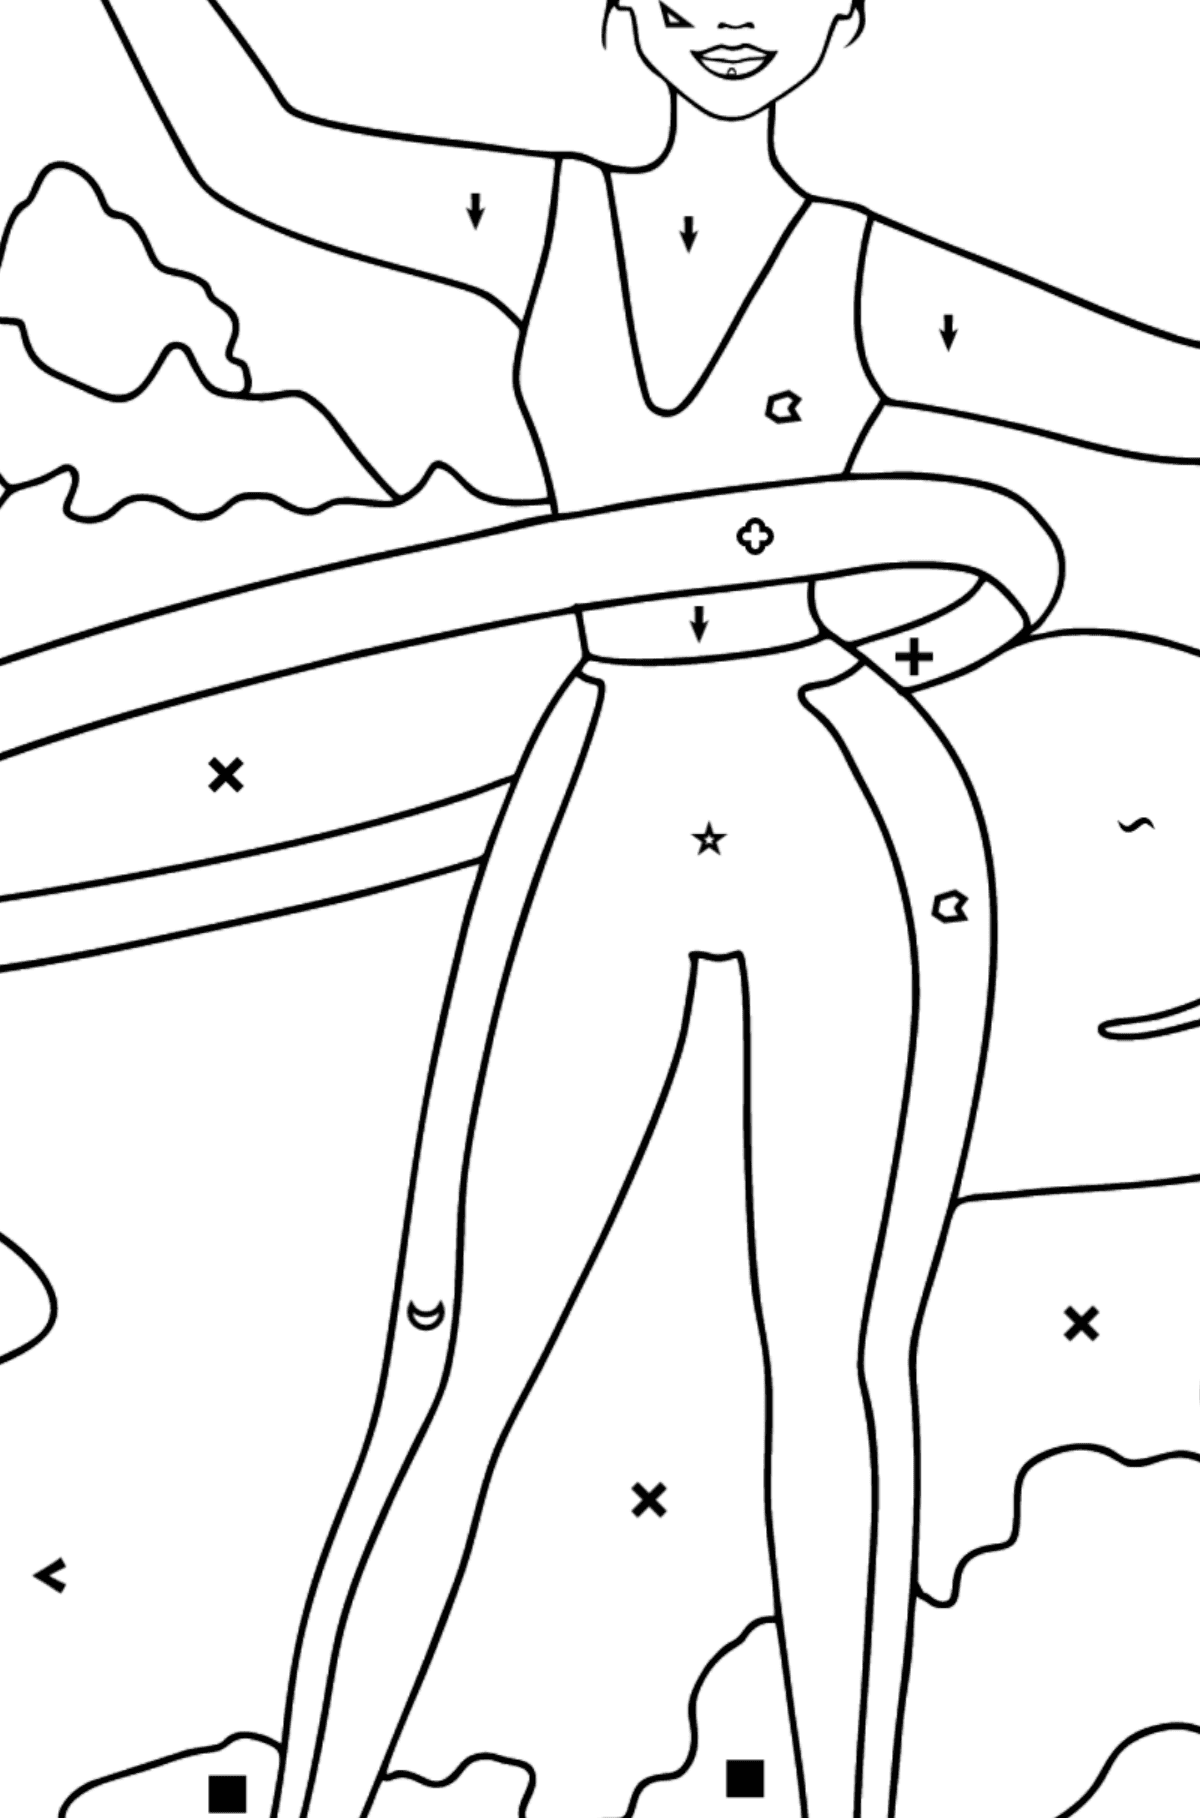 Barbie Doll and Sports coloring page - Coloring by Symbols and Geometric Shapes for Kids